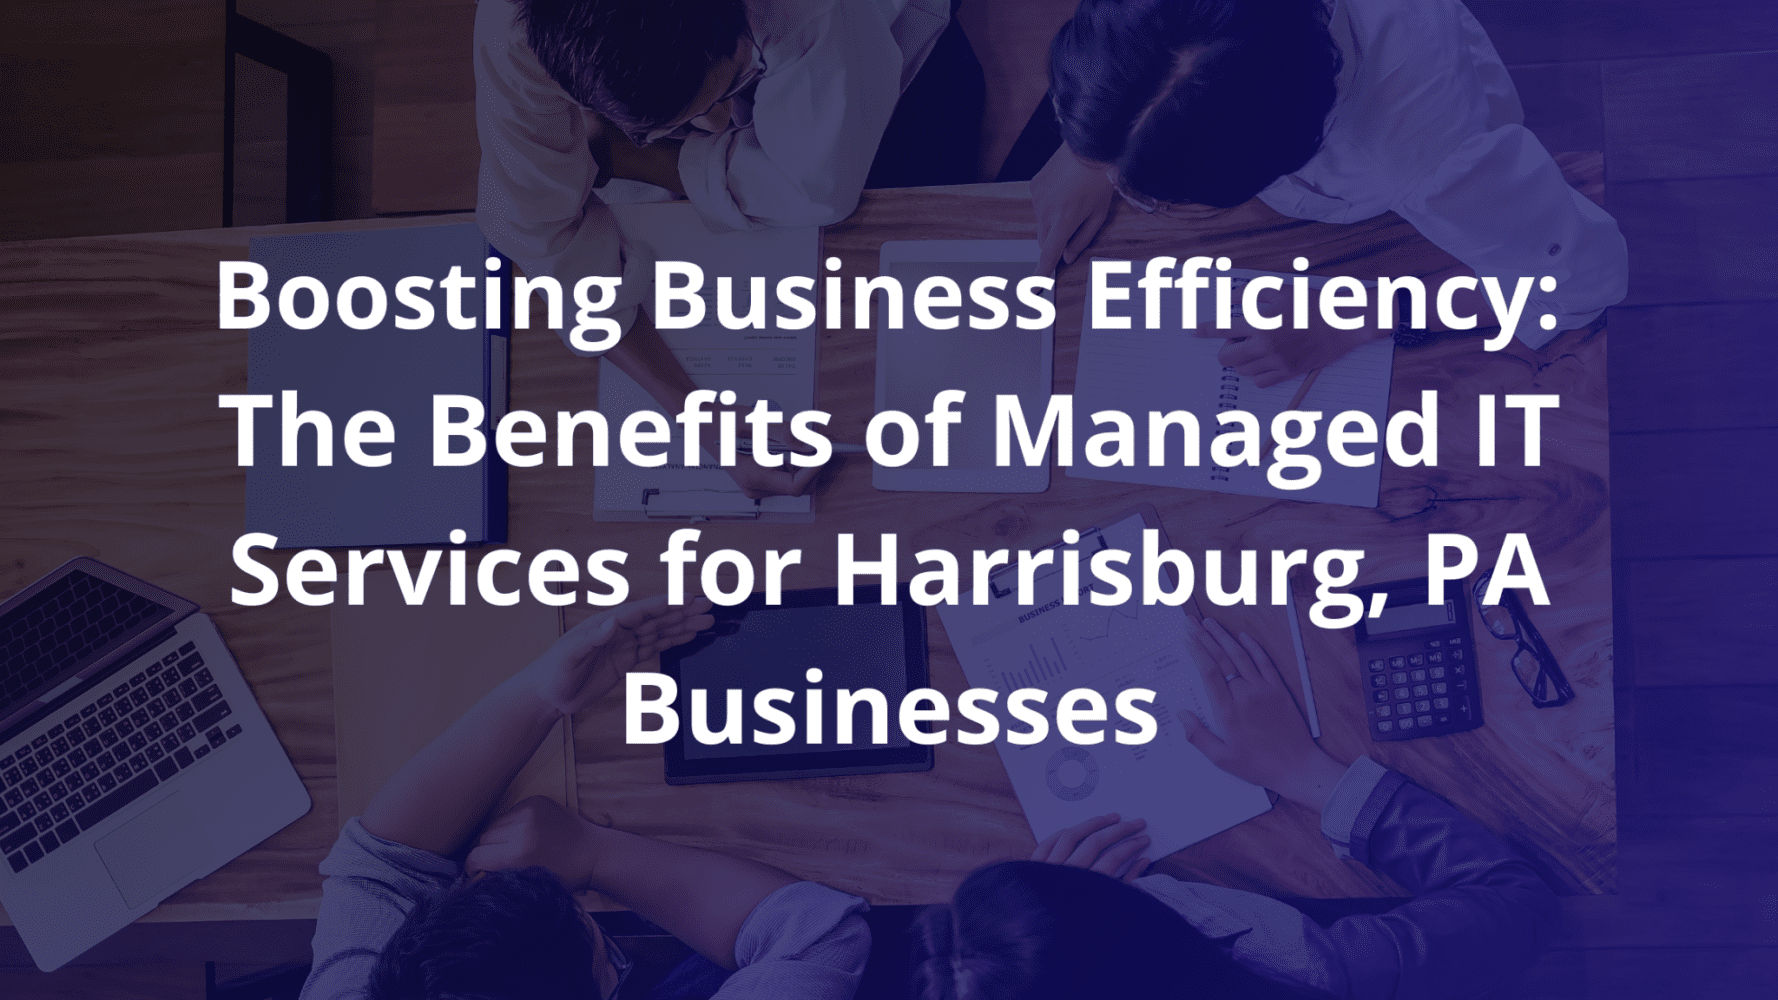 Boosting Business Efficiency The Benefits of Managed IT Services for Harrisburg, PA Businesses